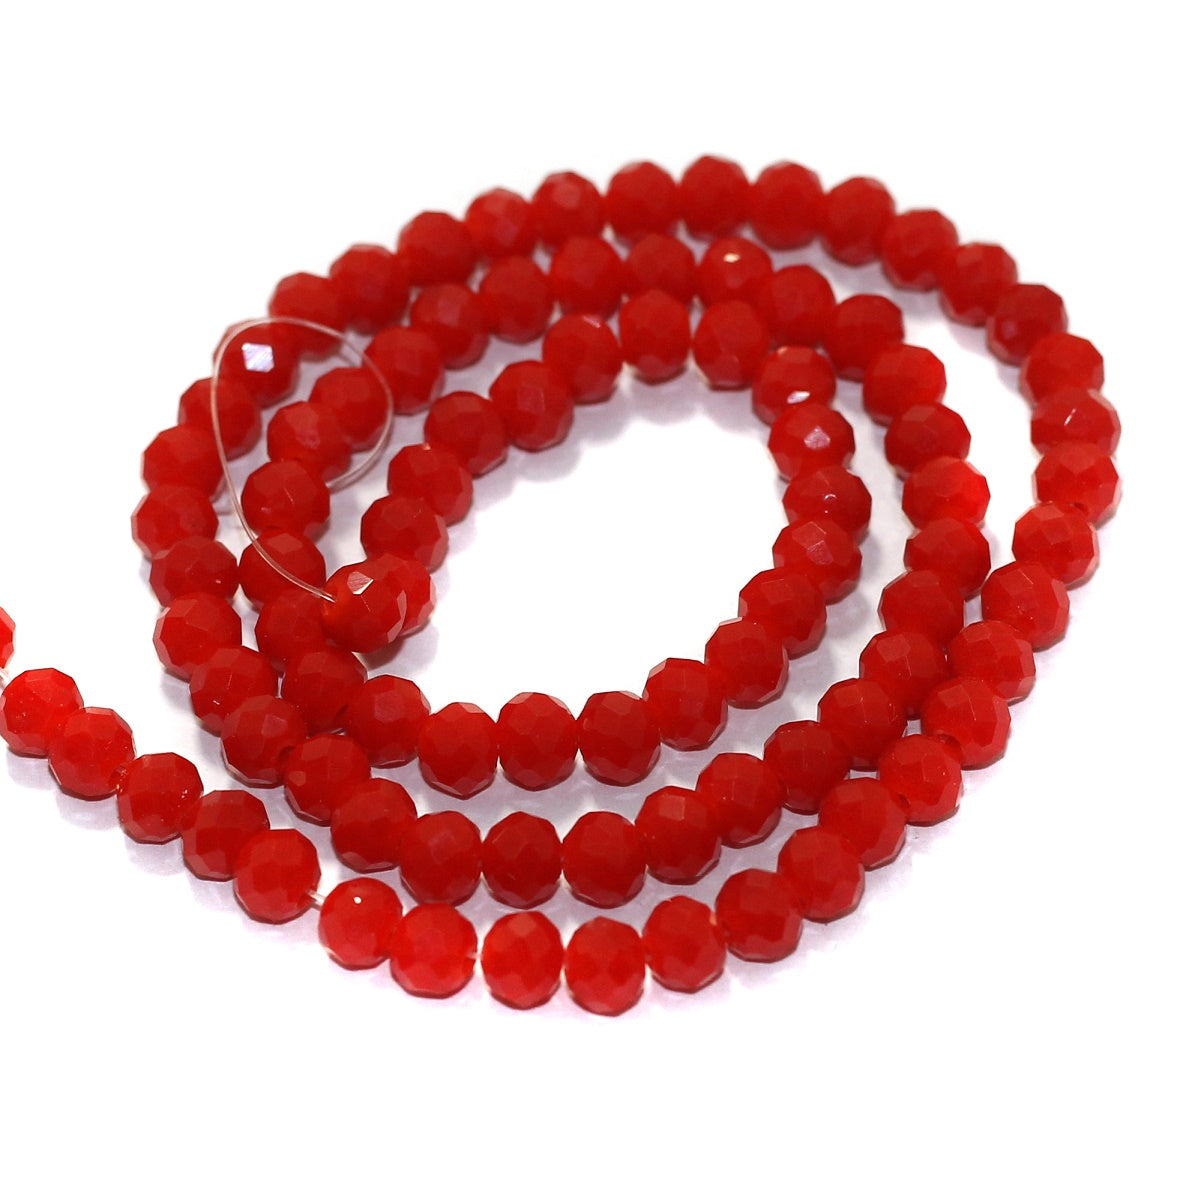 85 Pcs, 6mm Red Glass Crystal Beads Roundelle 1String